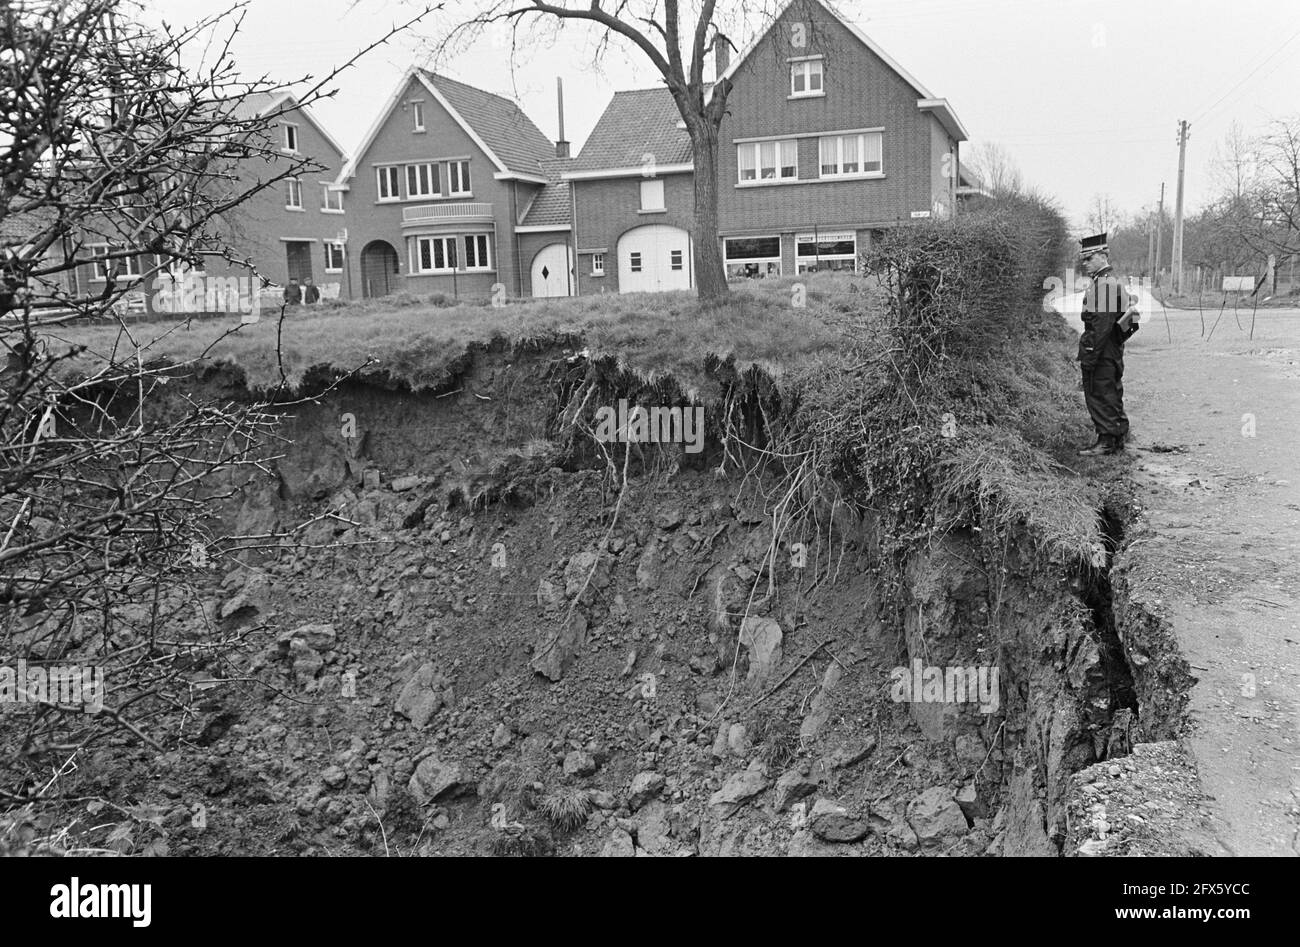 Landslides in Belgian municipality Zichen-Zussen-Bolder, Gendarme guards road along subsidence, April 5, 1966, municipalities, subsidence, roads, The Netherlands, 20th century press agency photo, news to remember, documentary, historic photography 1945-1990, visual stories, human history of the Twentieth Century, capturing moments in time Stock Photo